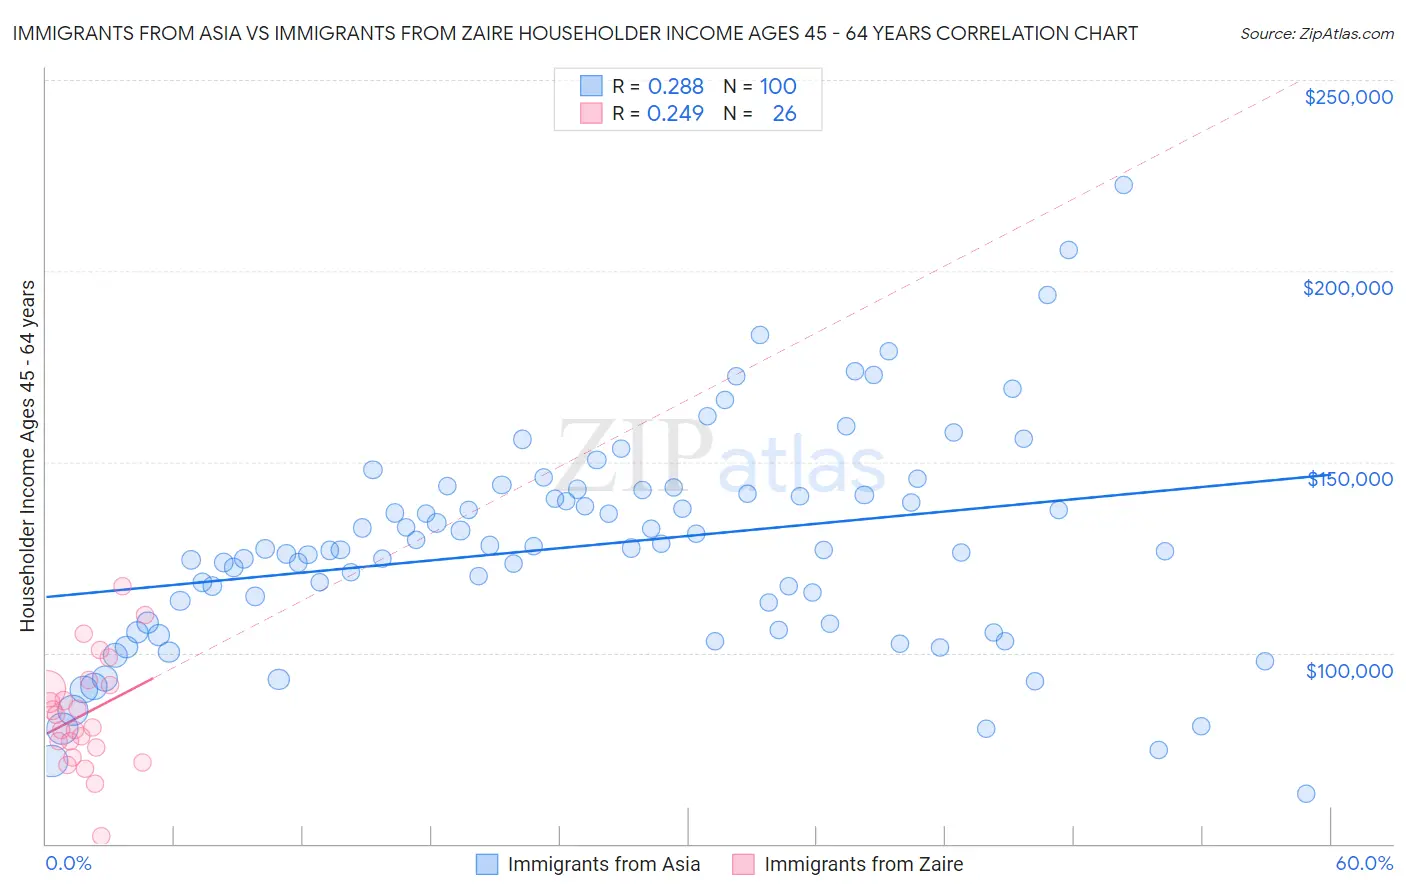 Immigrants from Asia vs Immigrants from Zaire Householder Income Ages 45 - 64 years